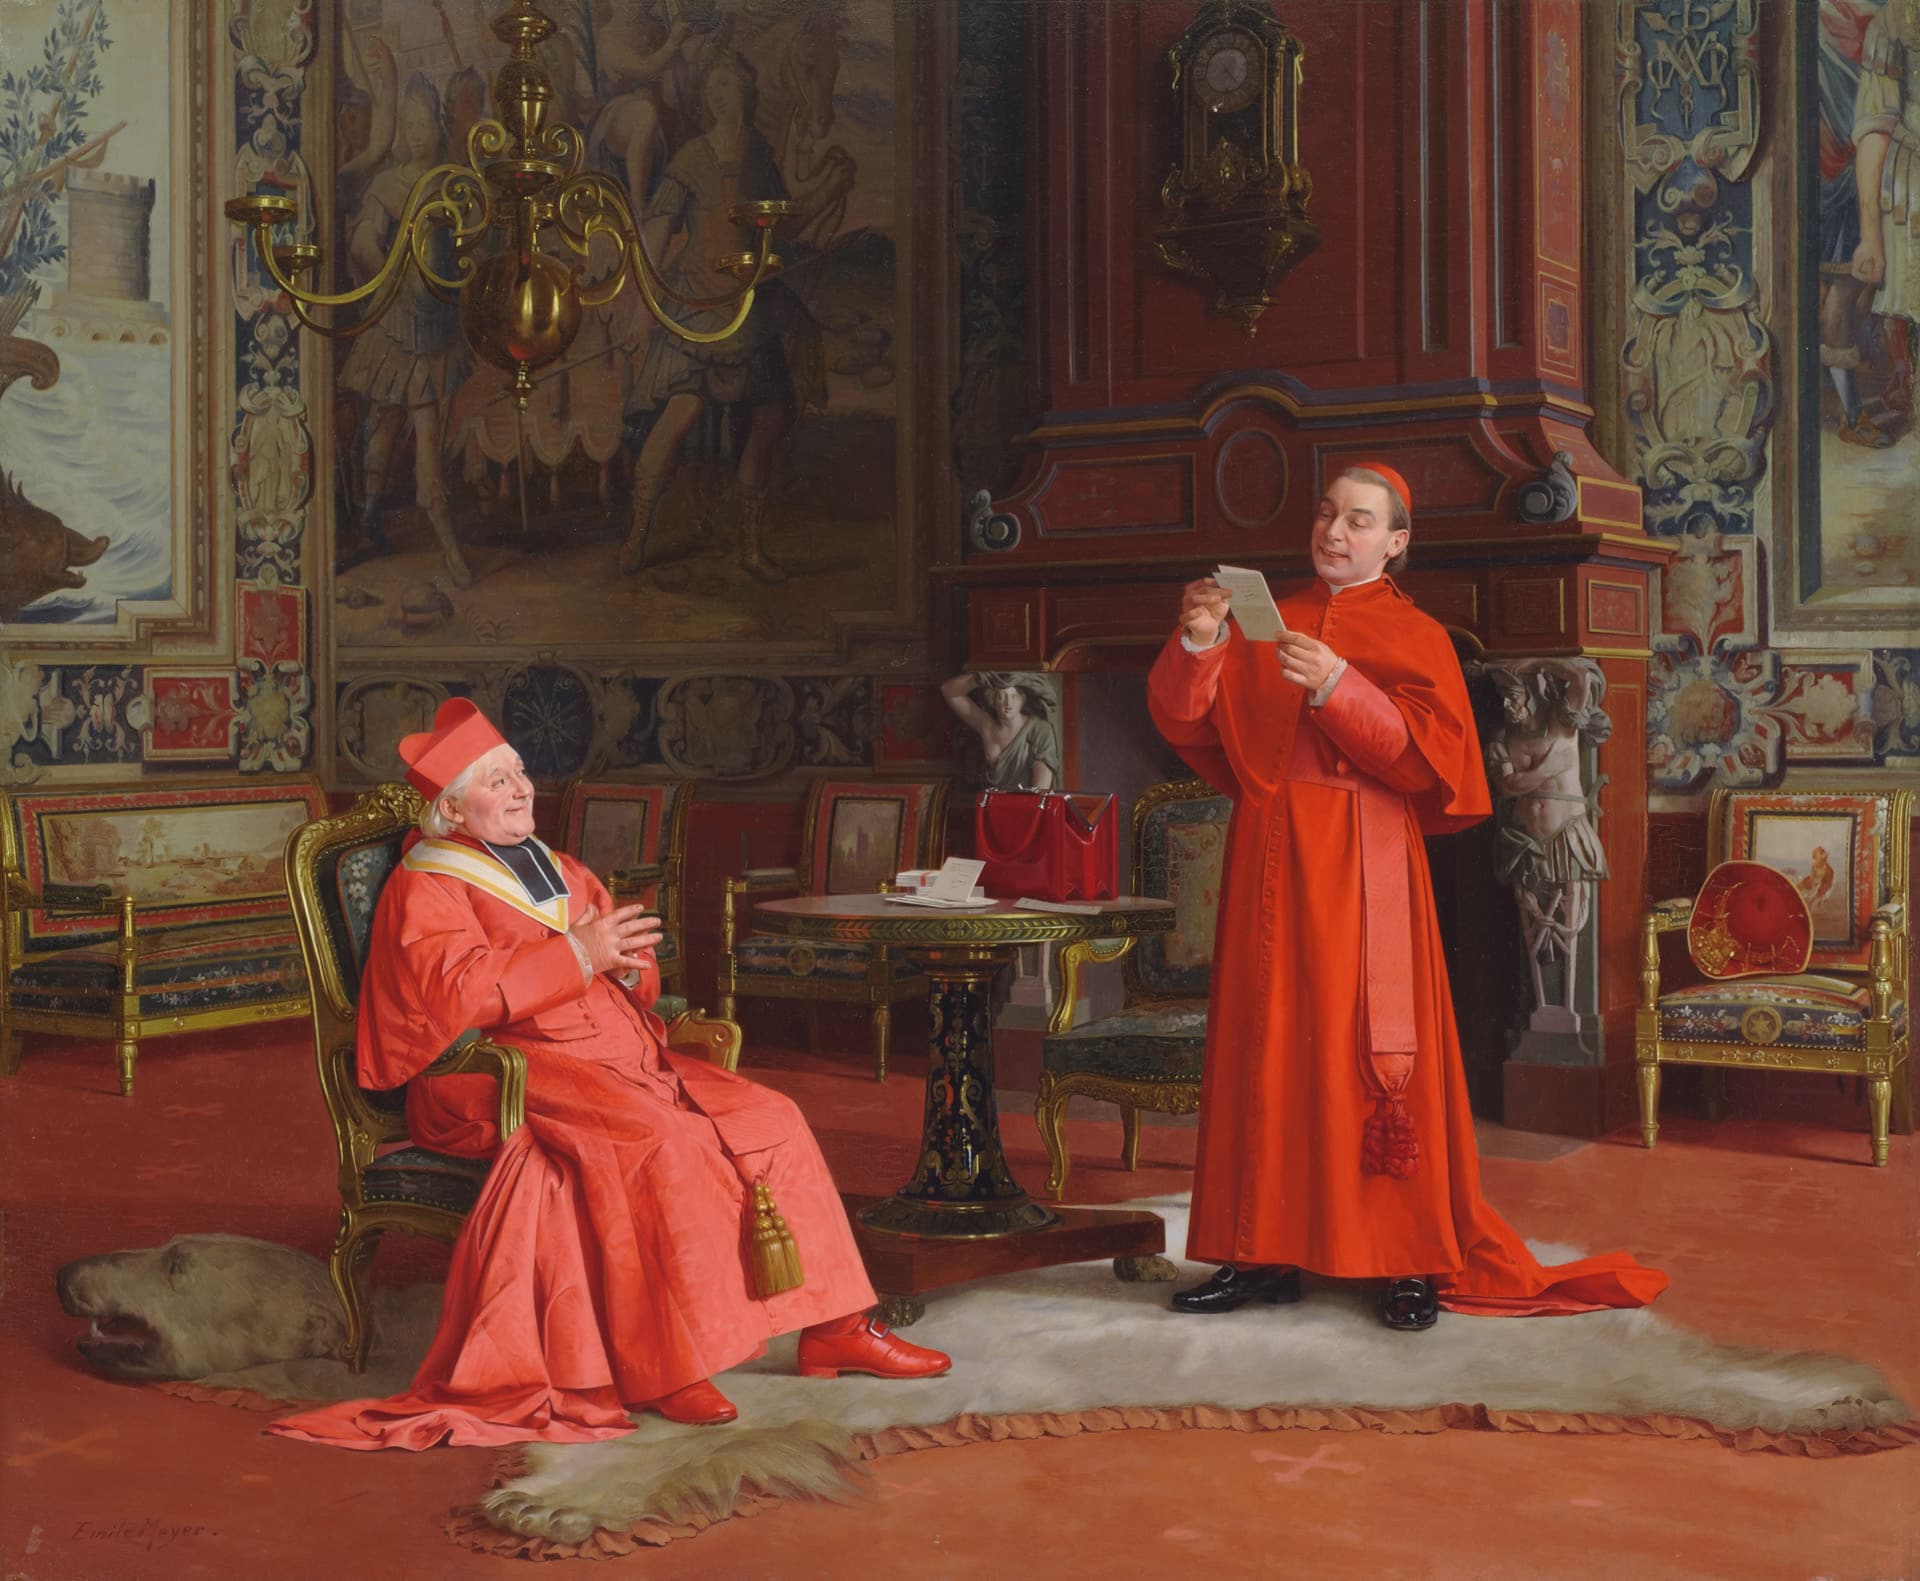 a painting of two cardinals in an opulent interior